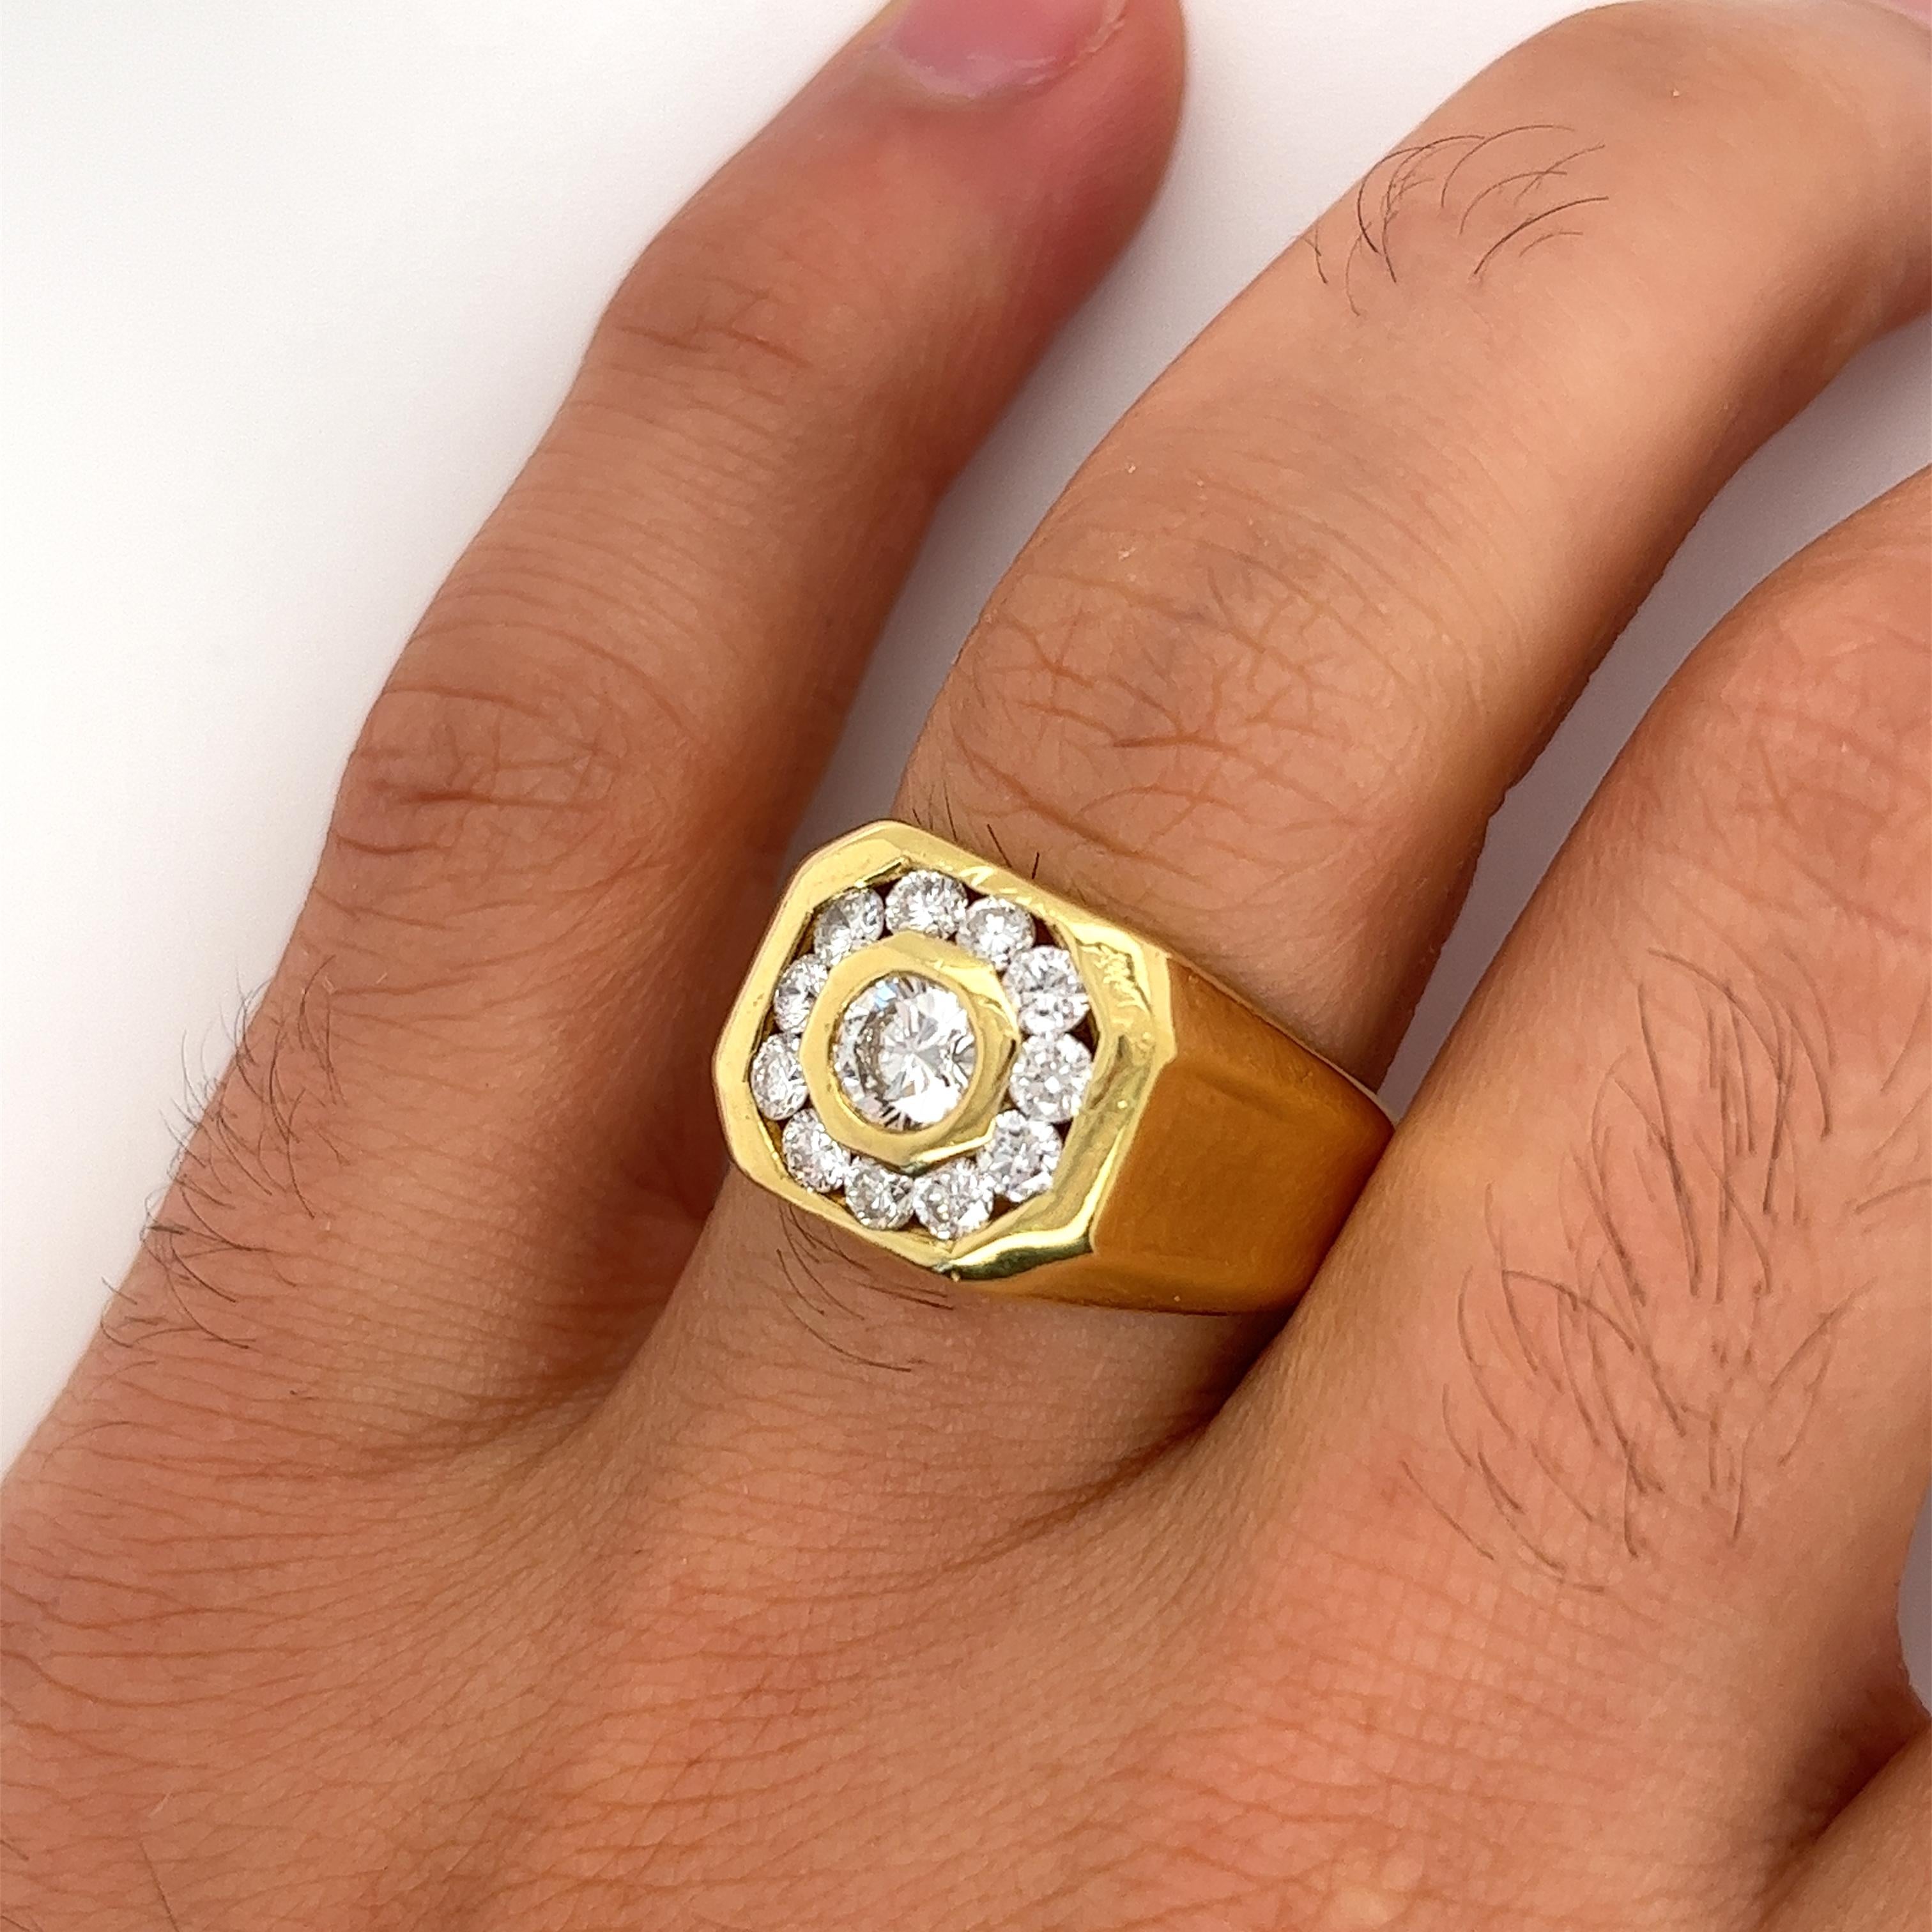 Vintage 1.50 CTTW Men's Round Cut Natural Diamond Ring. Crafted in 18K solid yellow gold. Featuring a bezel-set center stone and a channel-set diamond halo adorning the center. The finish is polished, with smooth edges that glide smoothly on the